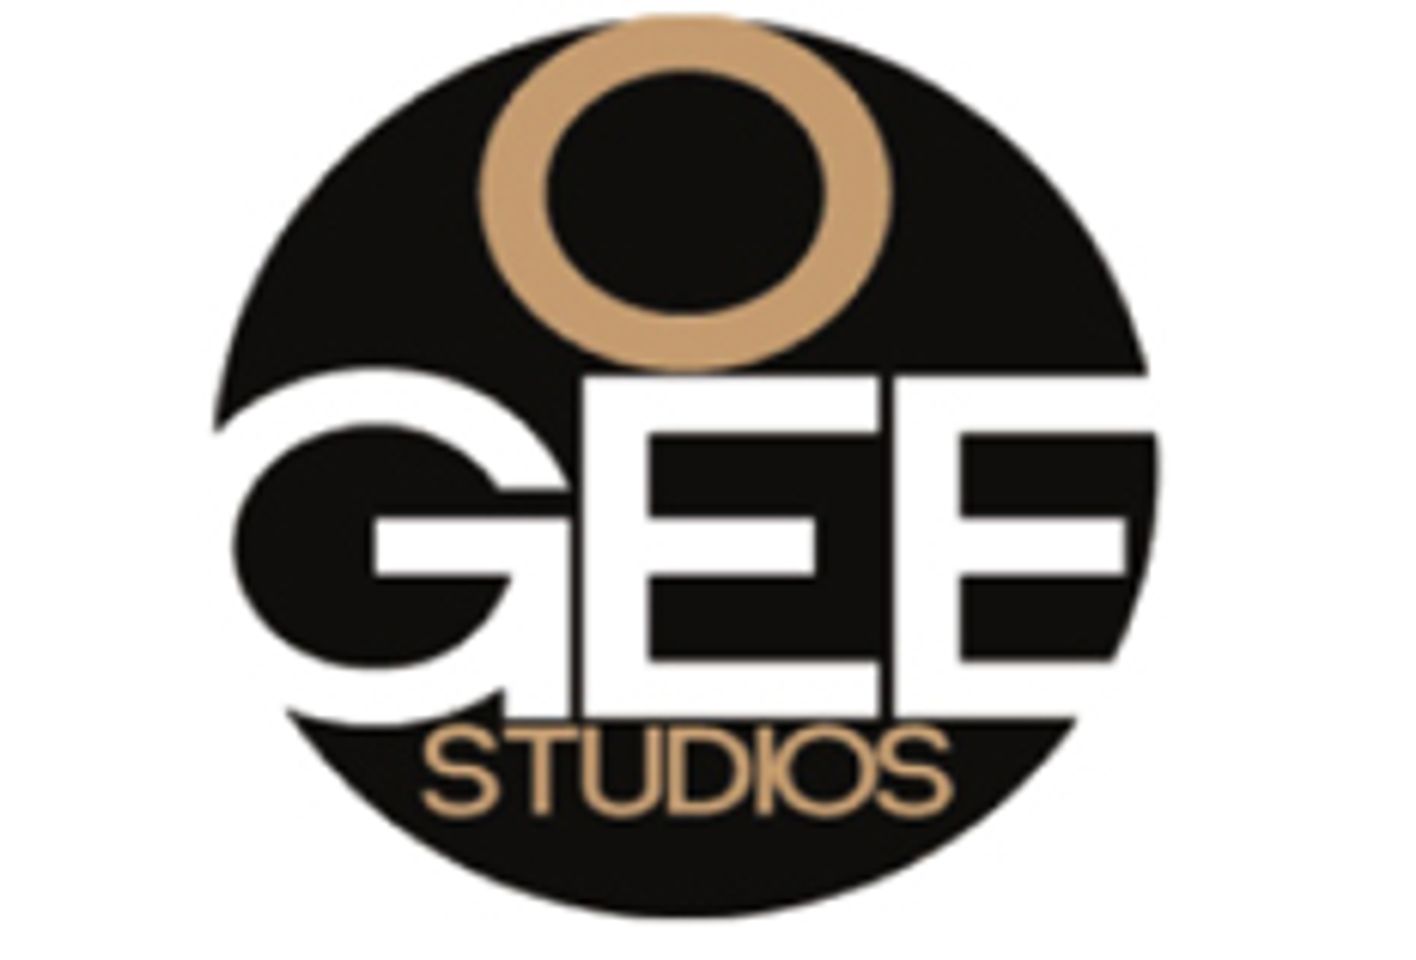 OGEE Studios Announces List of May Releases